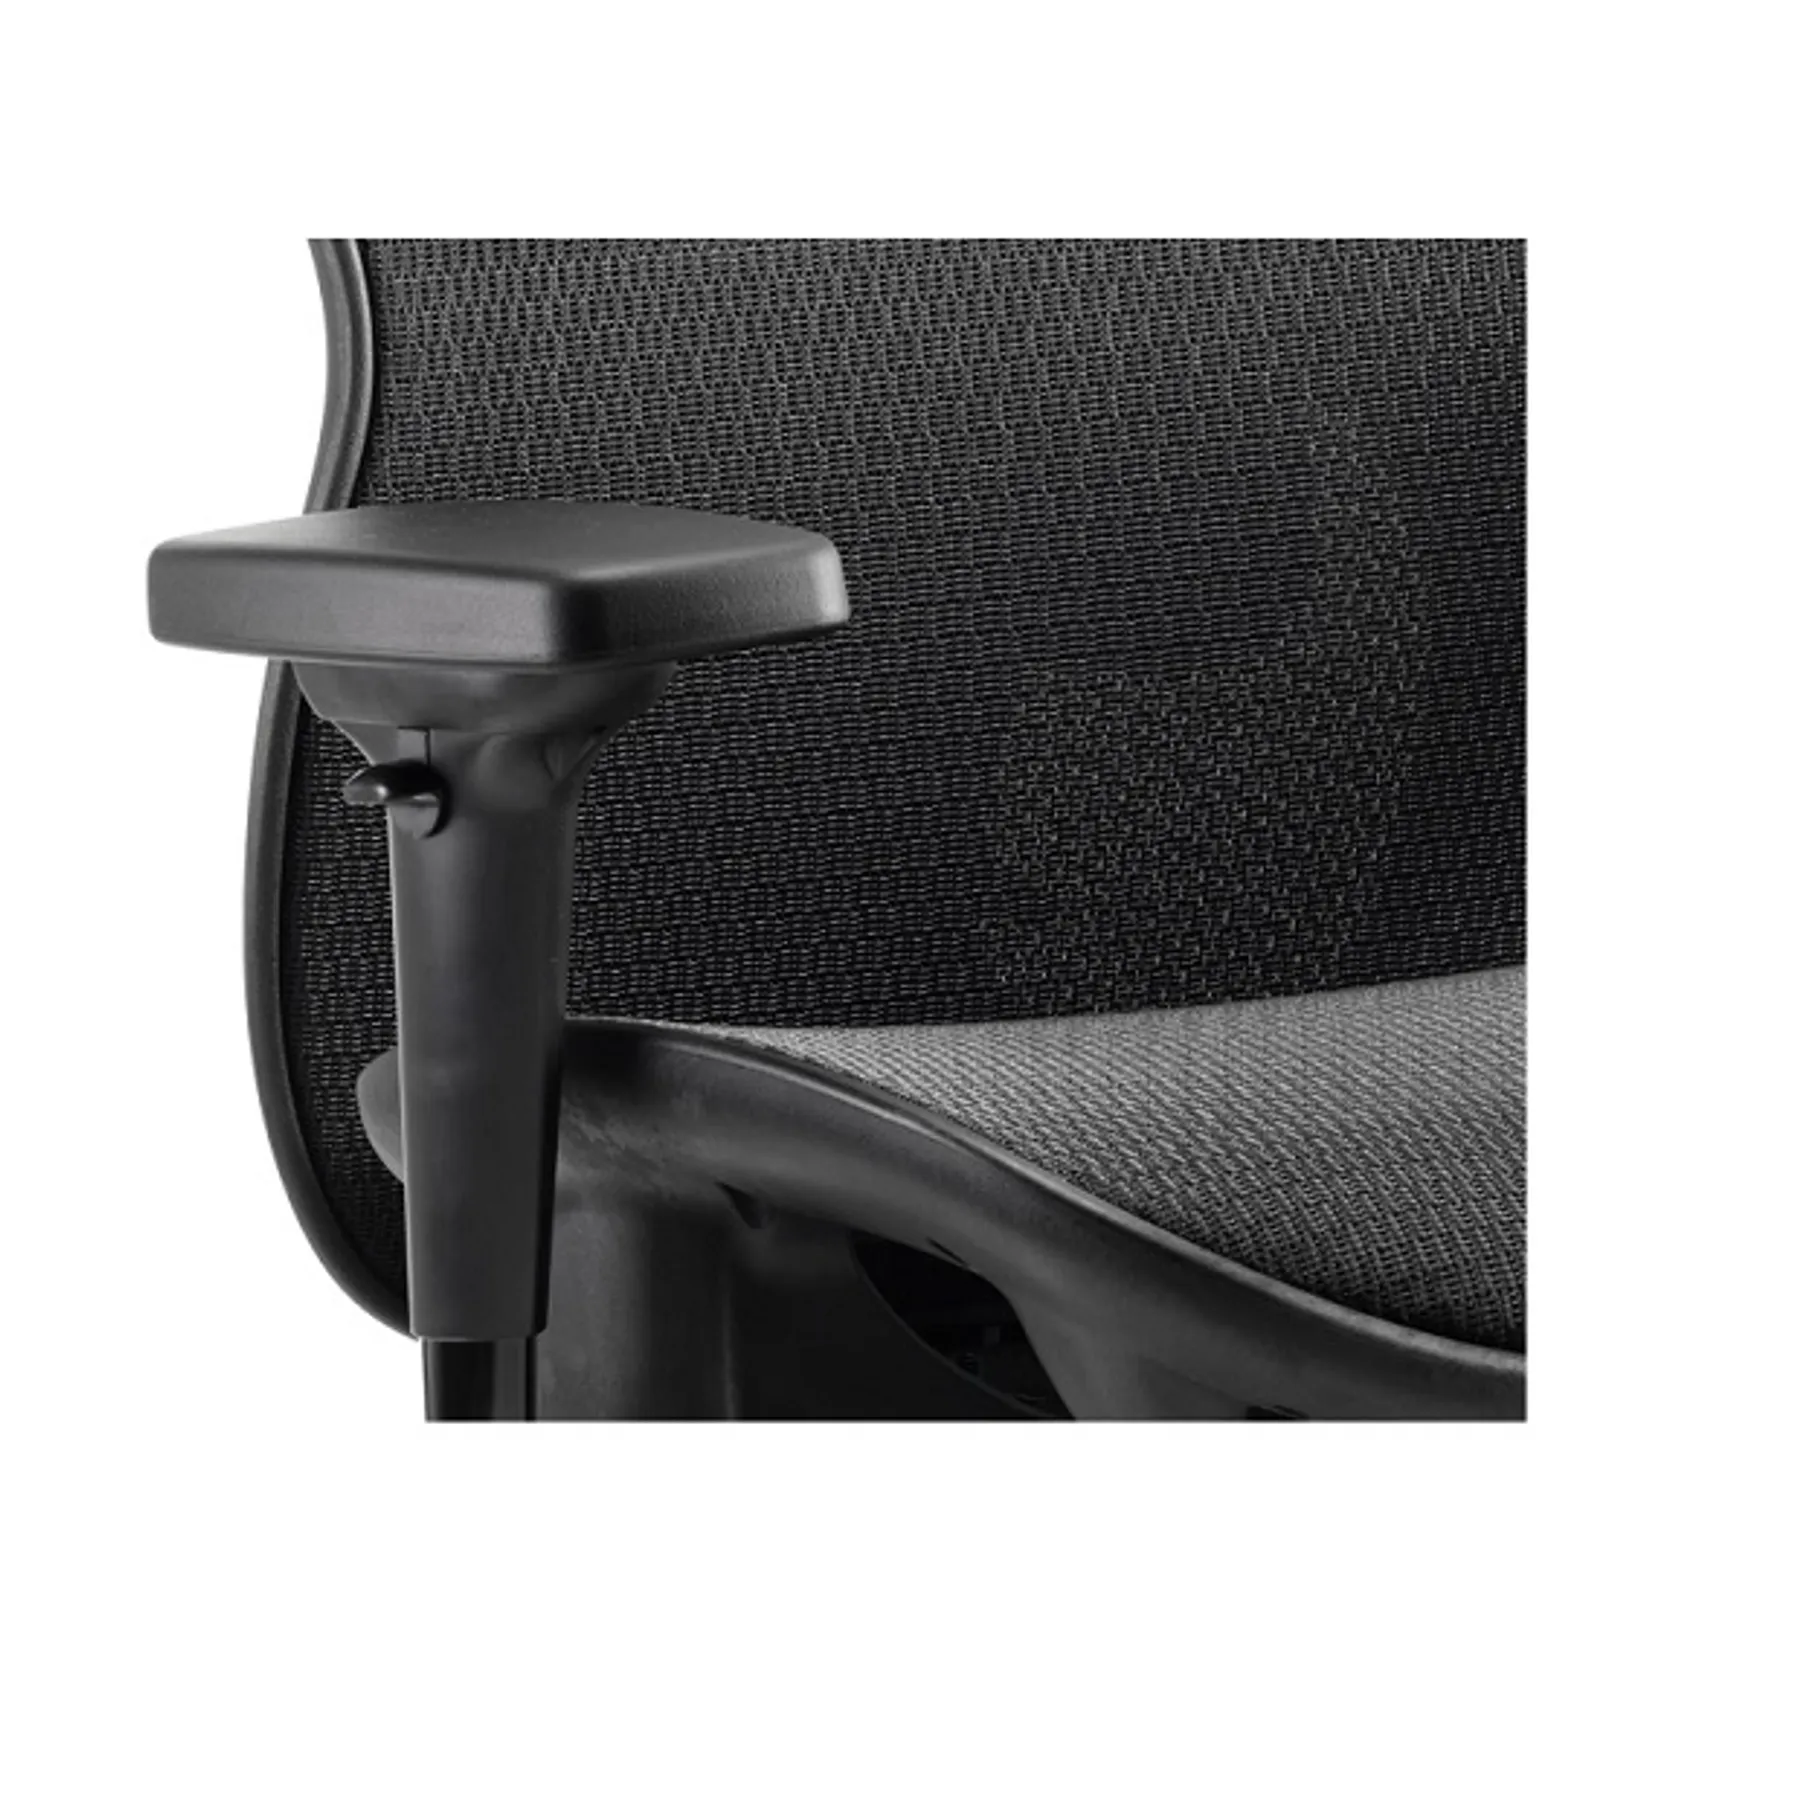 Lof Direct Dynamic Stealth Full Mesh Posture Chair with headrest detail